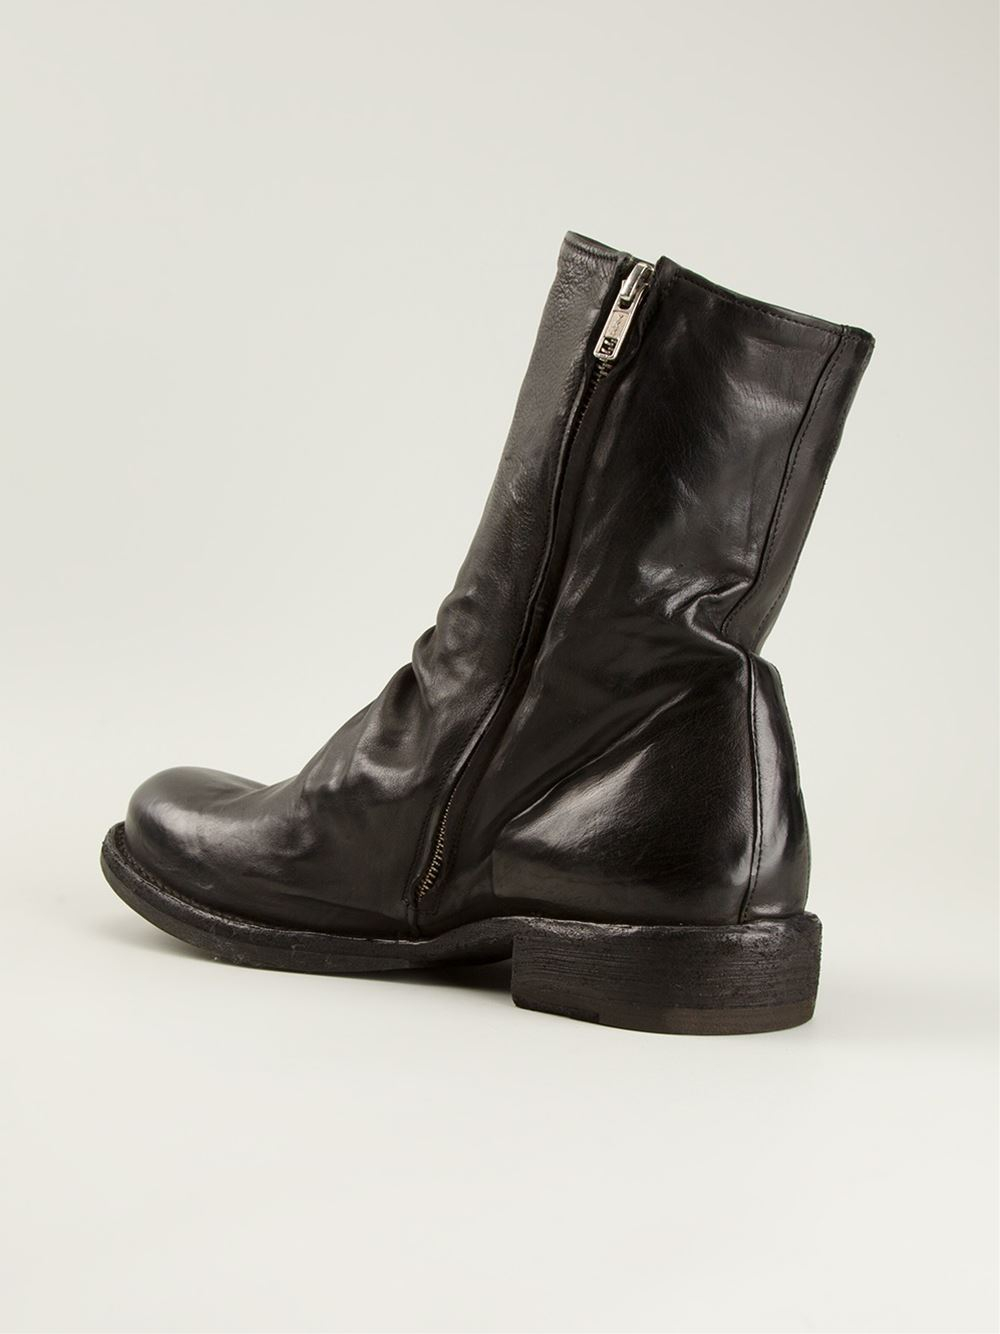 officine creative mens boots